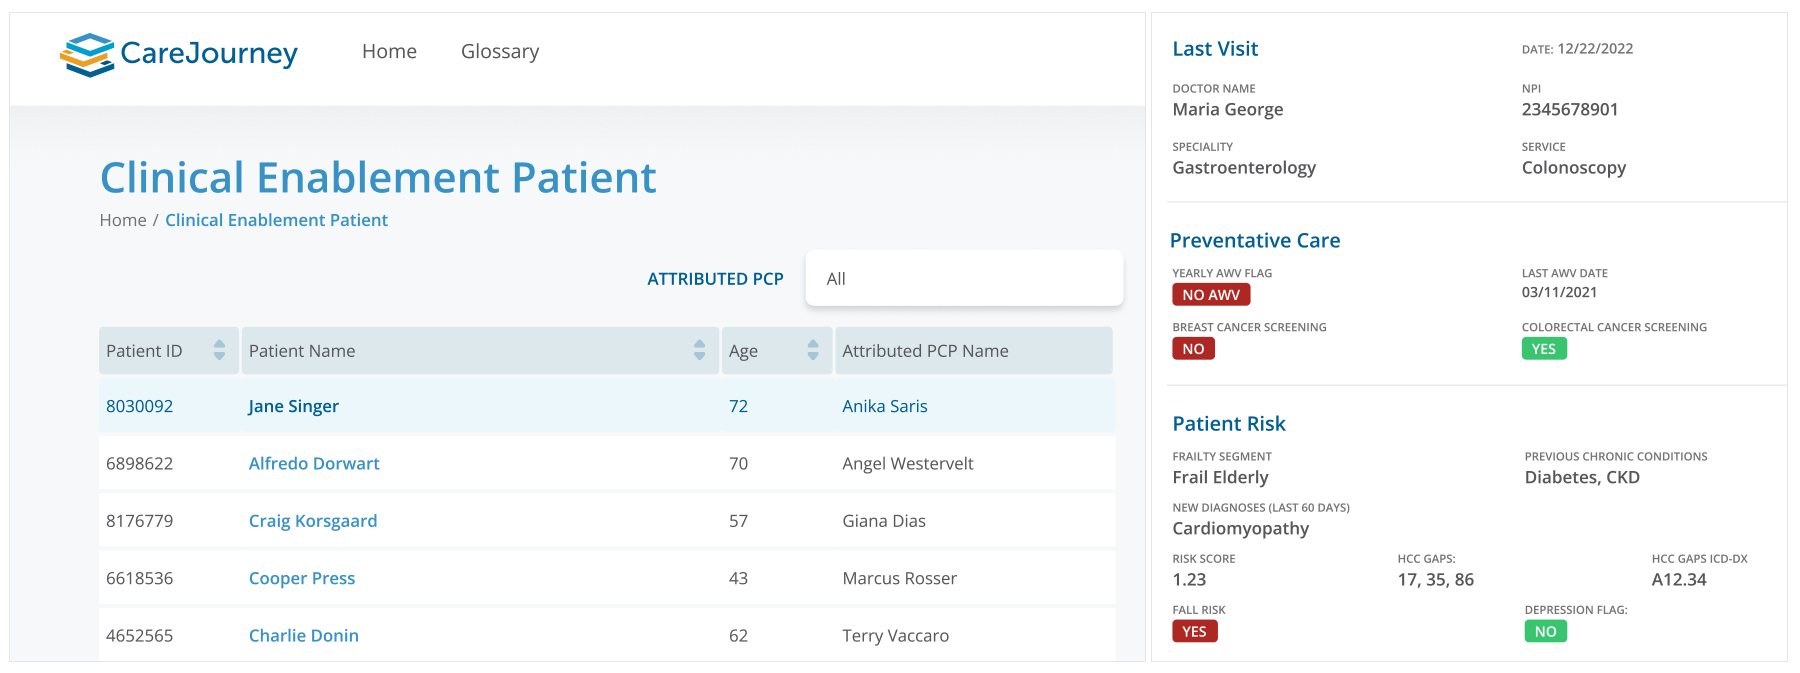 Sample CareJourney patient profile to enable informed and well-timed care management decisions.